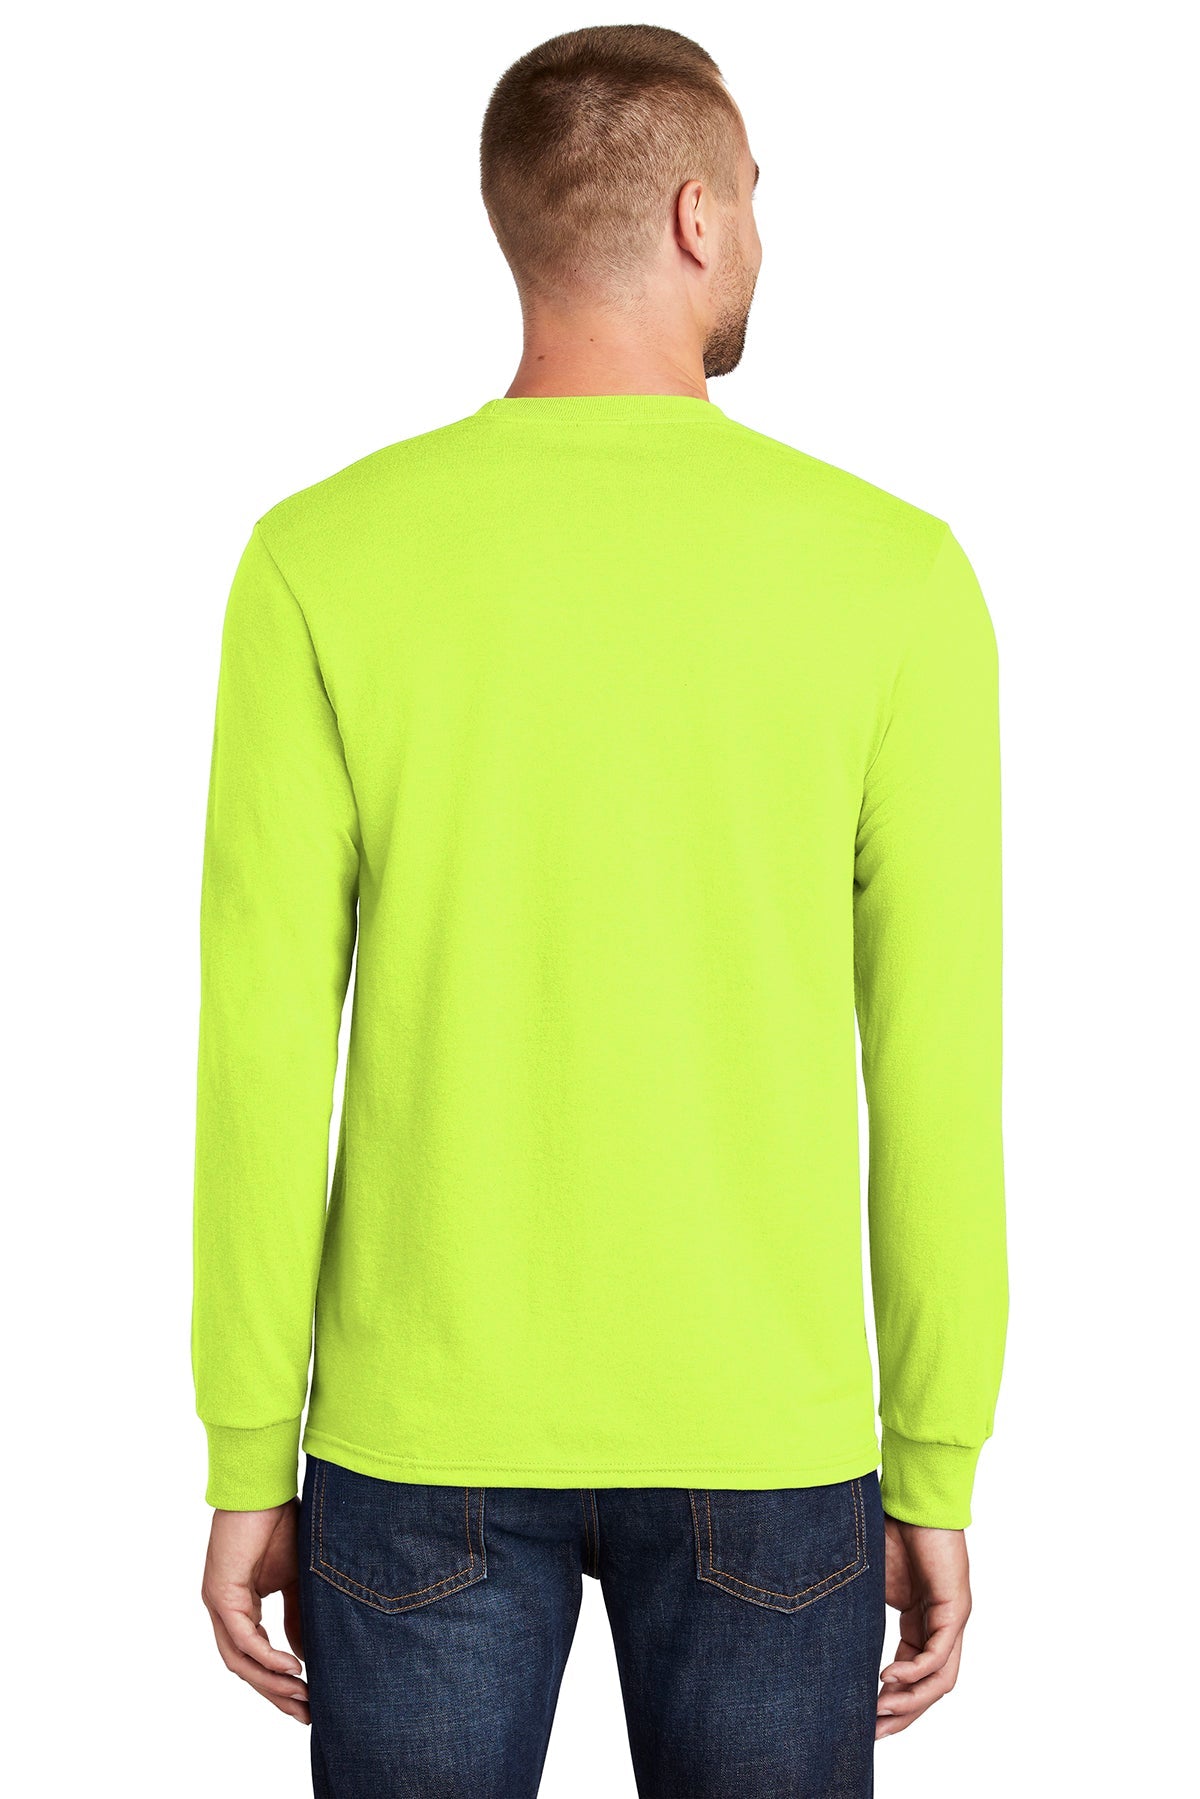 Port & Company Tall Long Sleeve Customized Core Blend Tee's, Safety Green